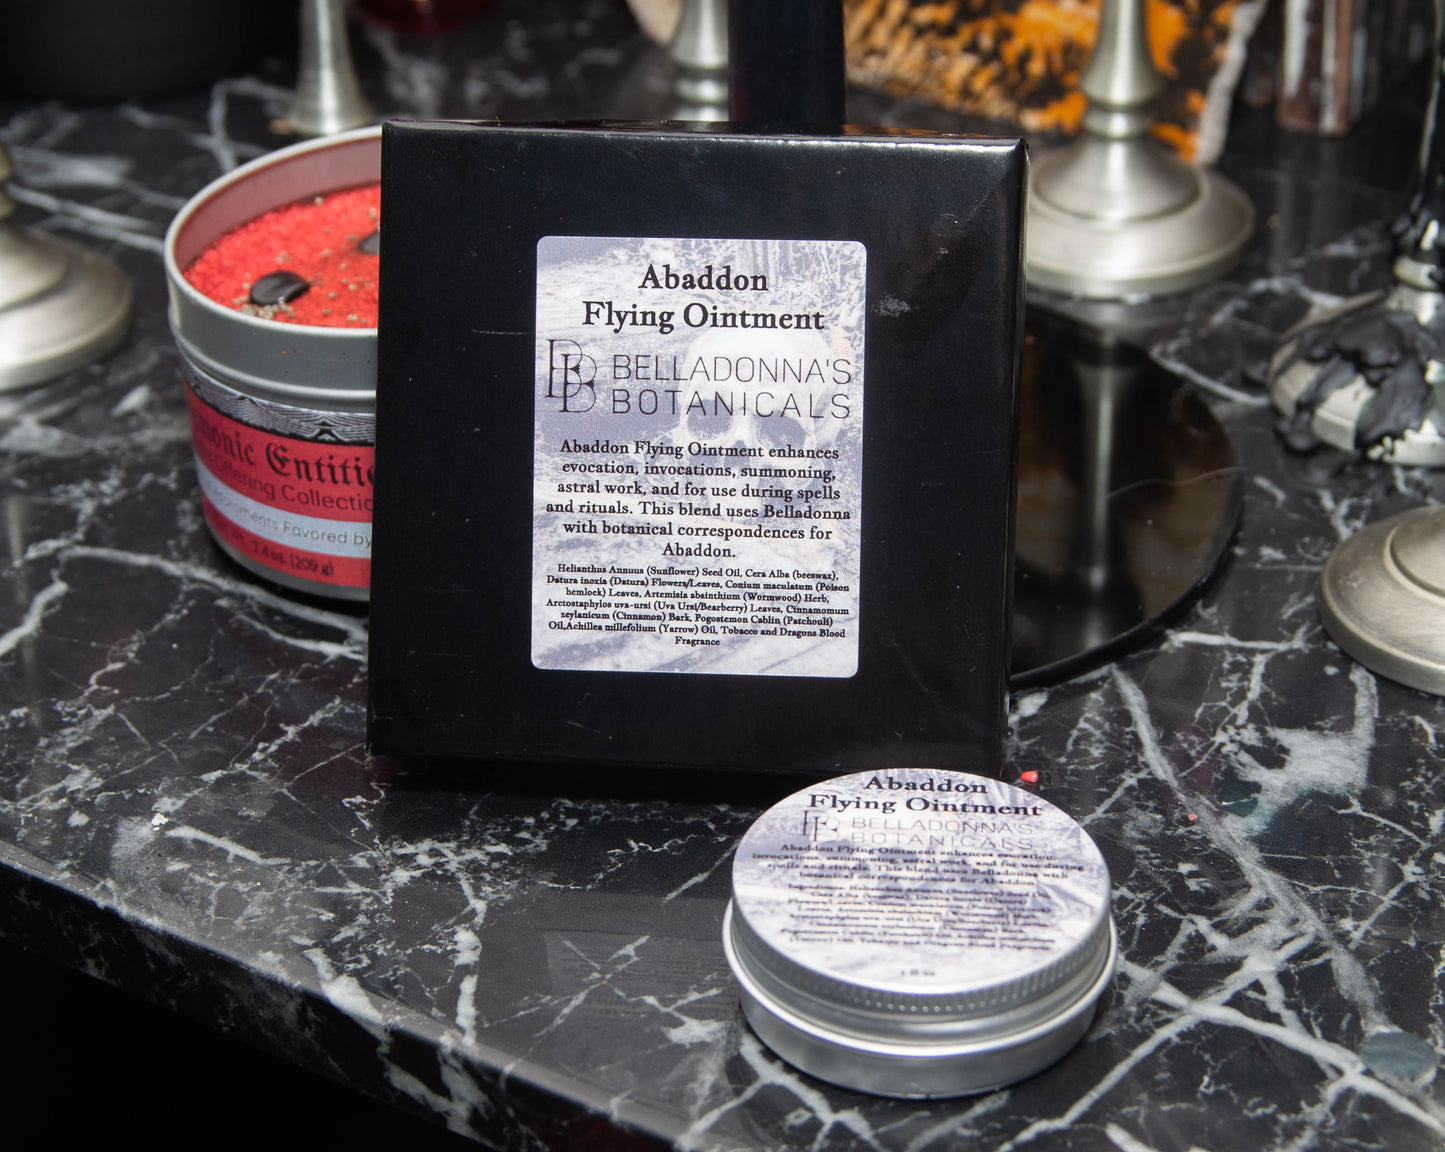 Abaddon Flying Ointment